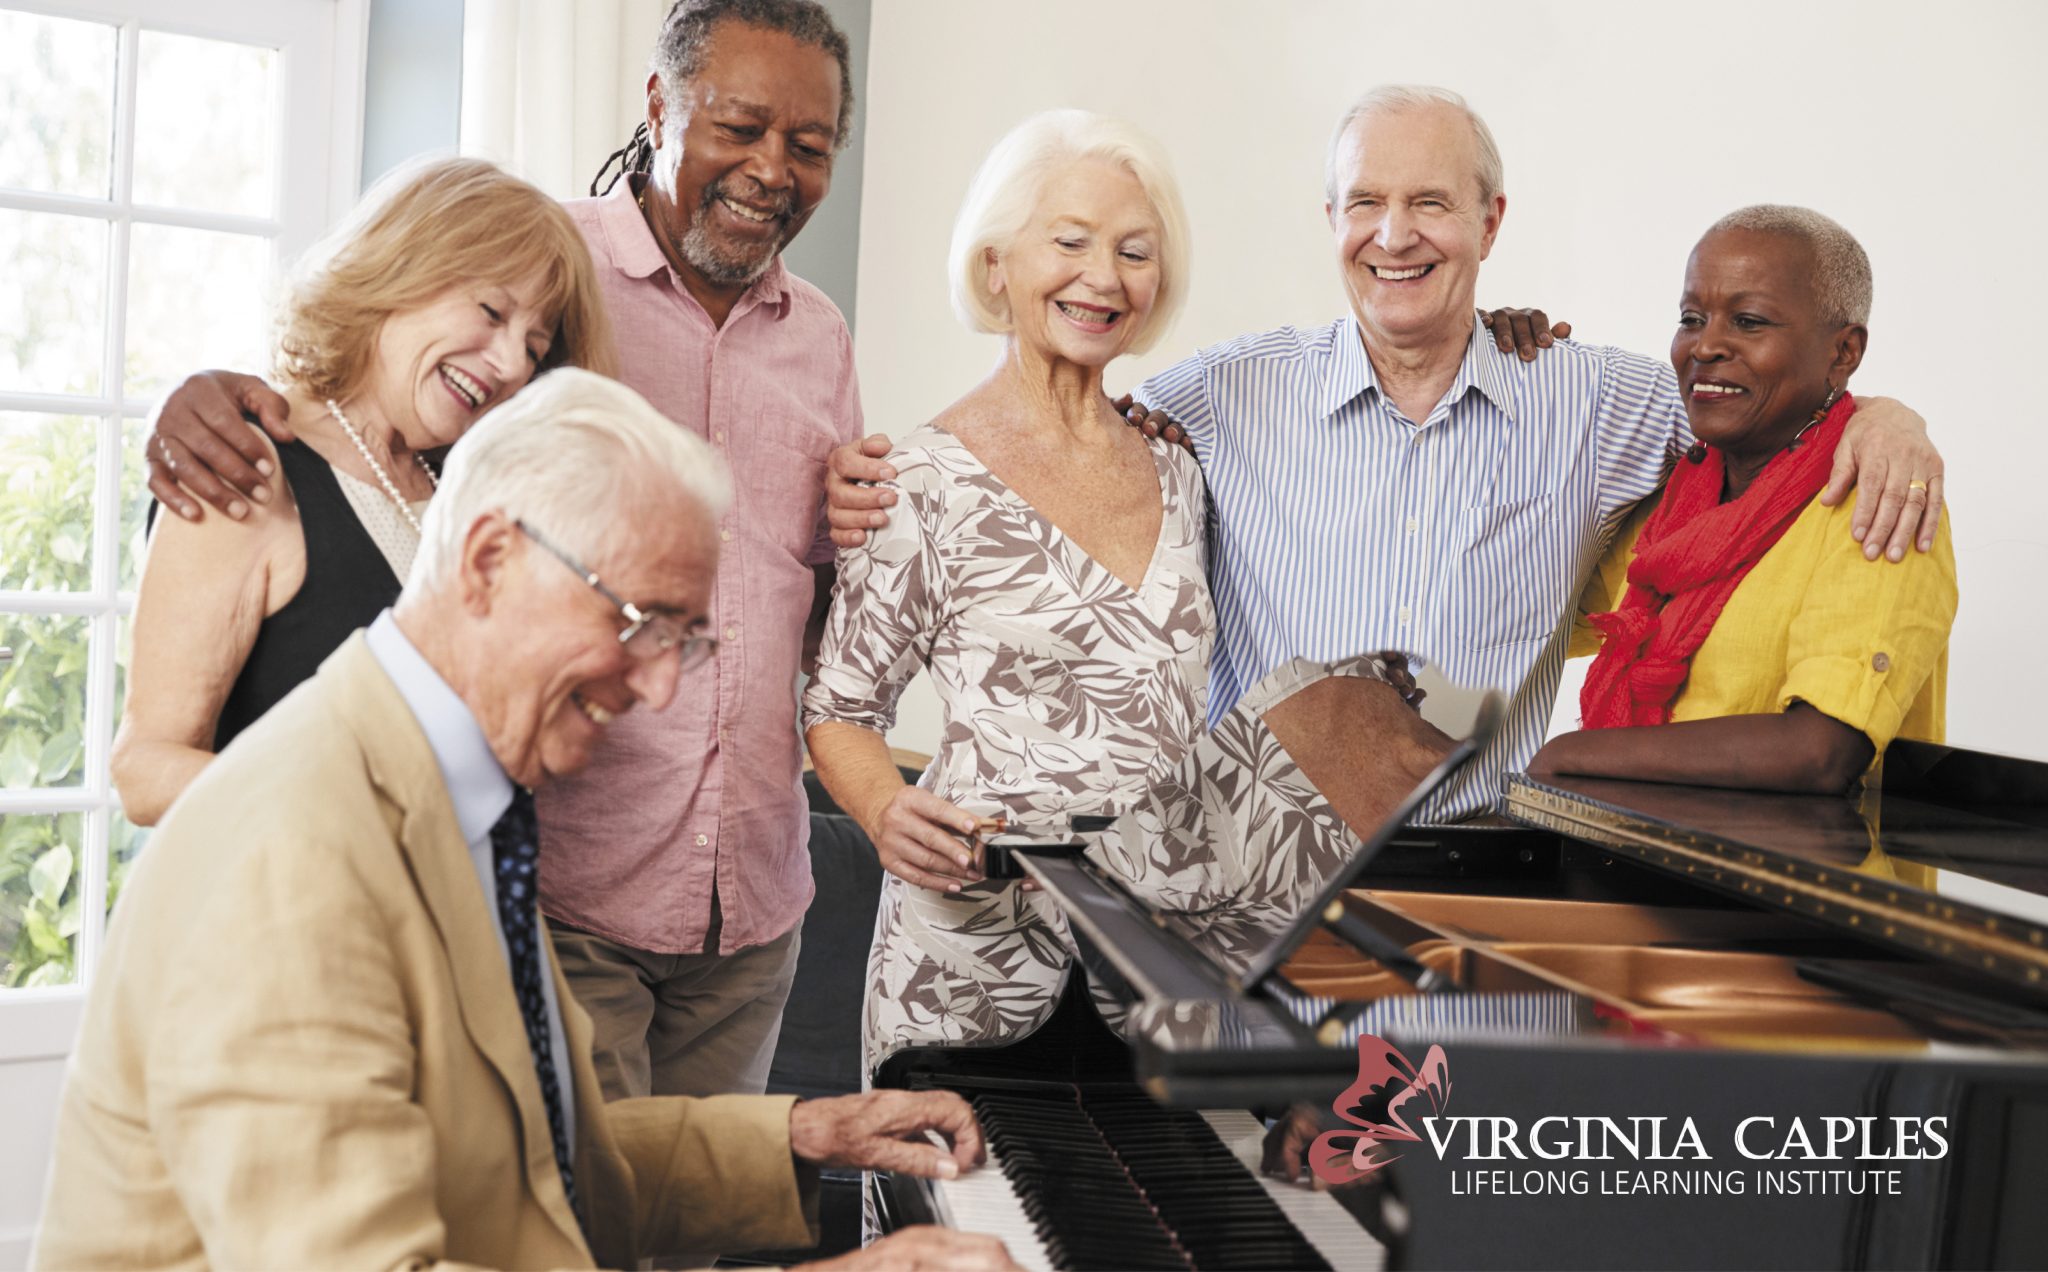 A group of elderly people gathered around a piano